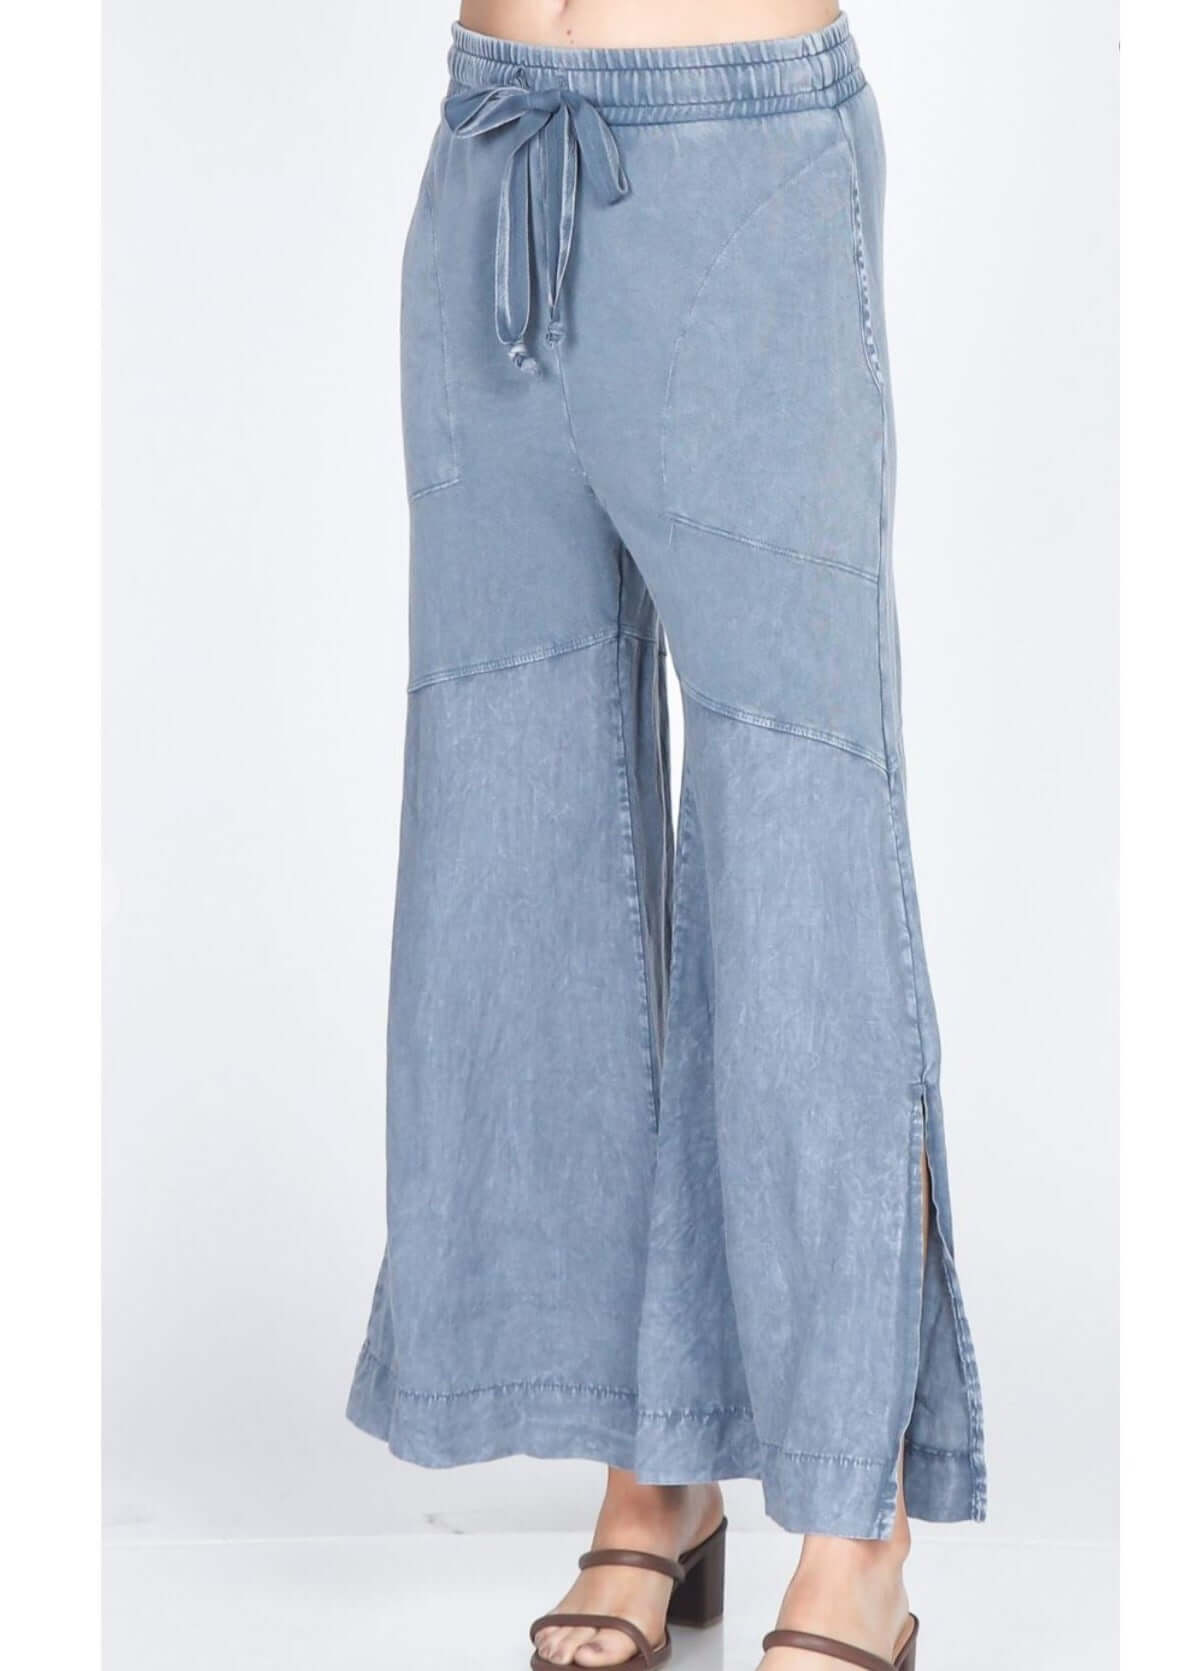 M. Rena Style# S4979 Ladies Luxury Cotton and Linen Wide Leg Terry Lounge Pants | Made in USA | Women's Fine Clothing Made in America | Color: Light Denim